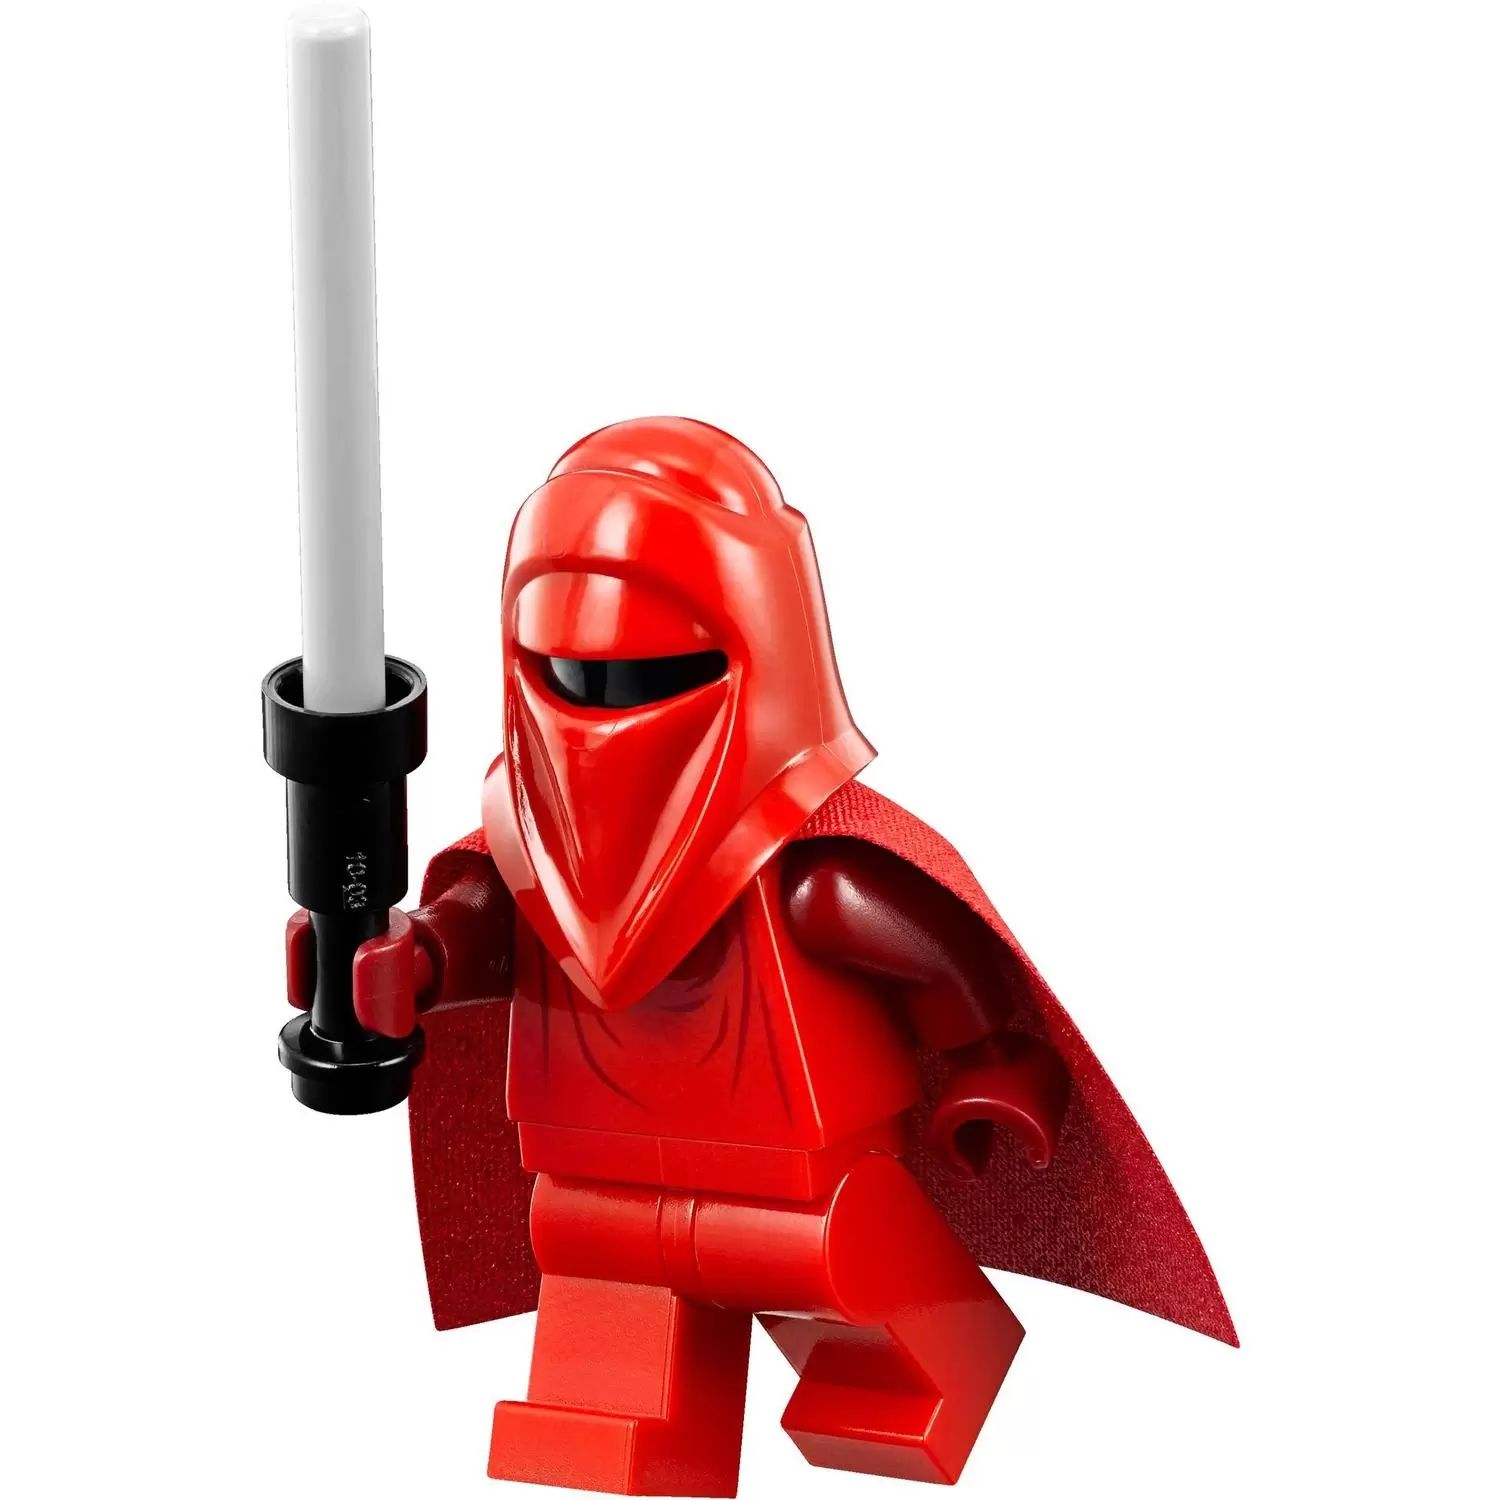 Minifigurines LEGO Star Wars - Royal Guard with Dark Red Arms and Hands